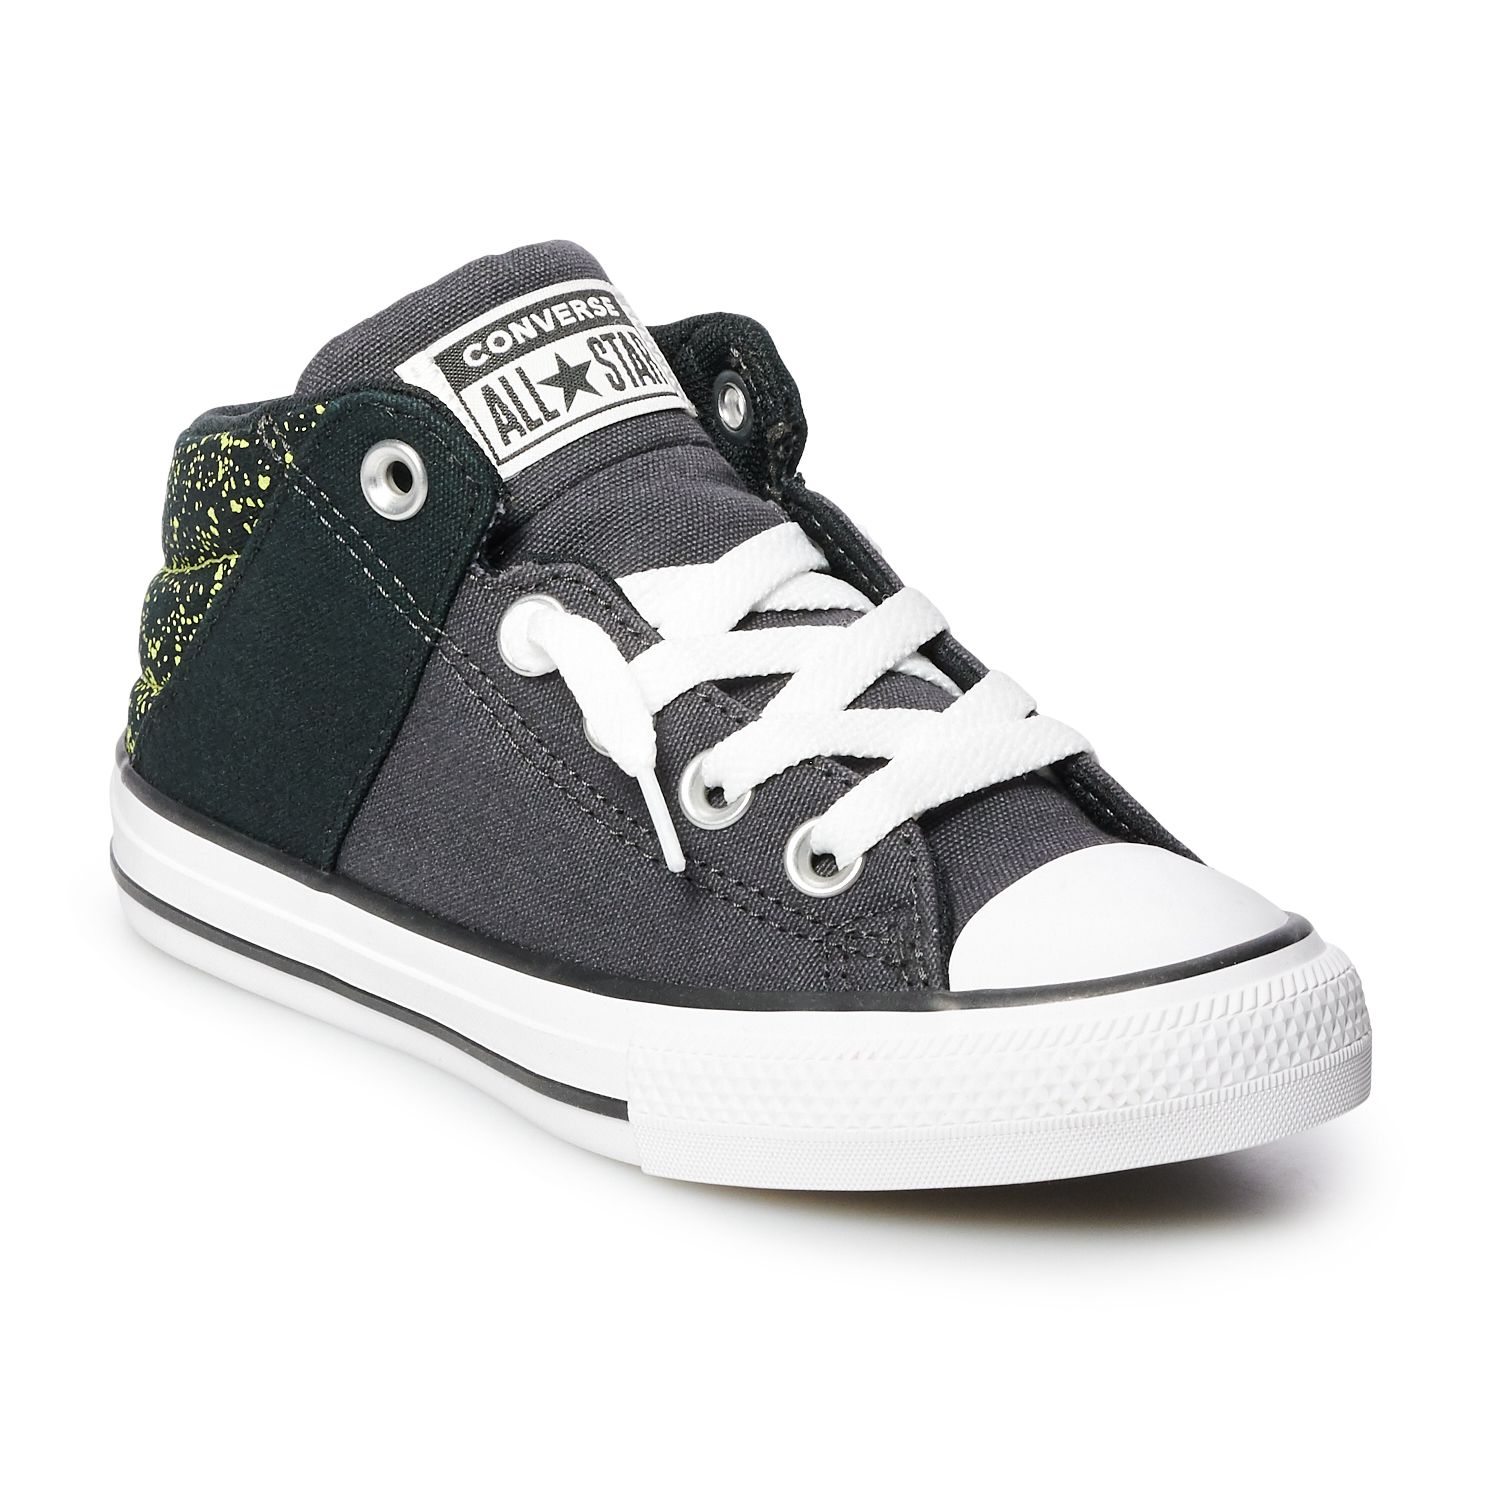 Boys' Converse Chuck Taylor All Star Street Mid Leather Sneakers